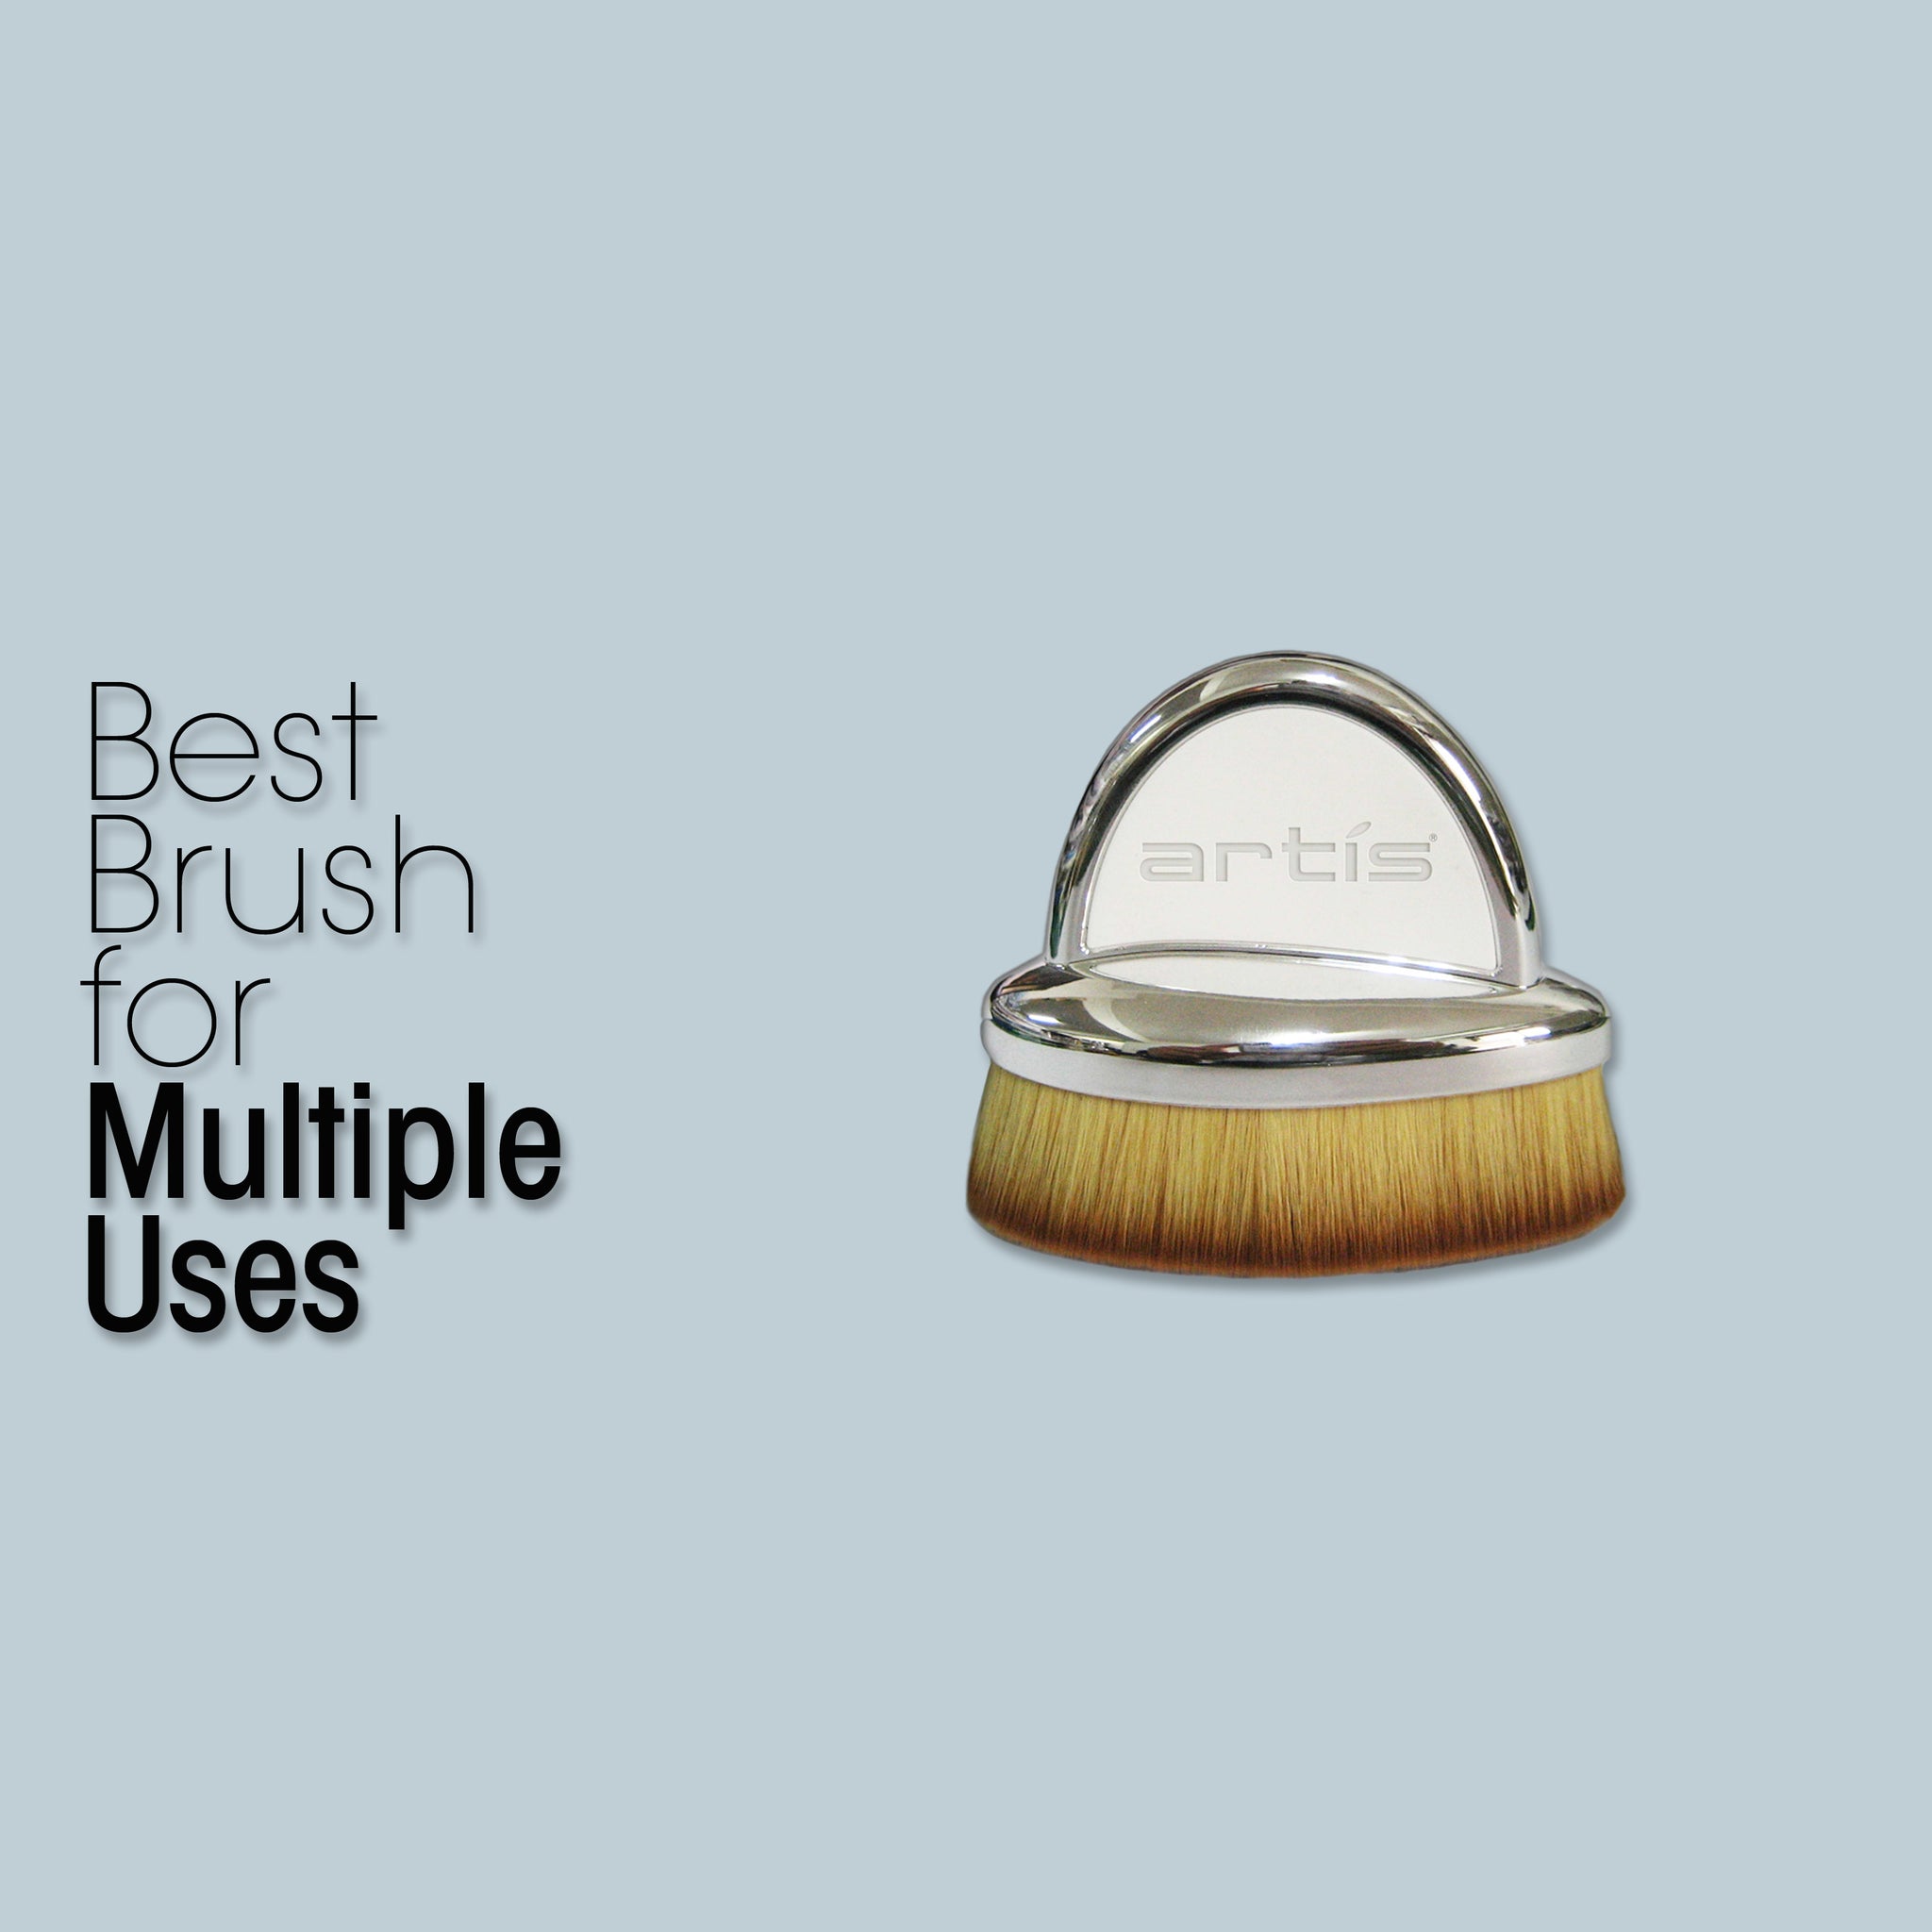 this is an image of the Fini Brush which is deemed as best to use for multiple makeup purposes.